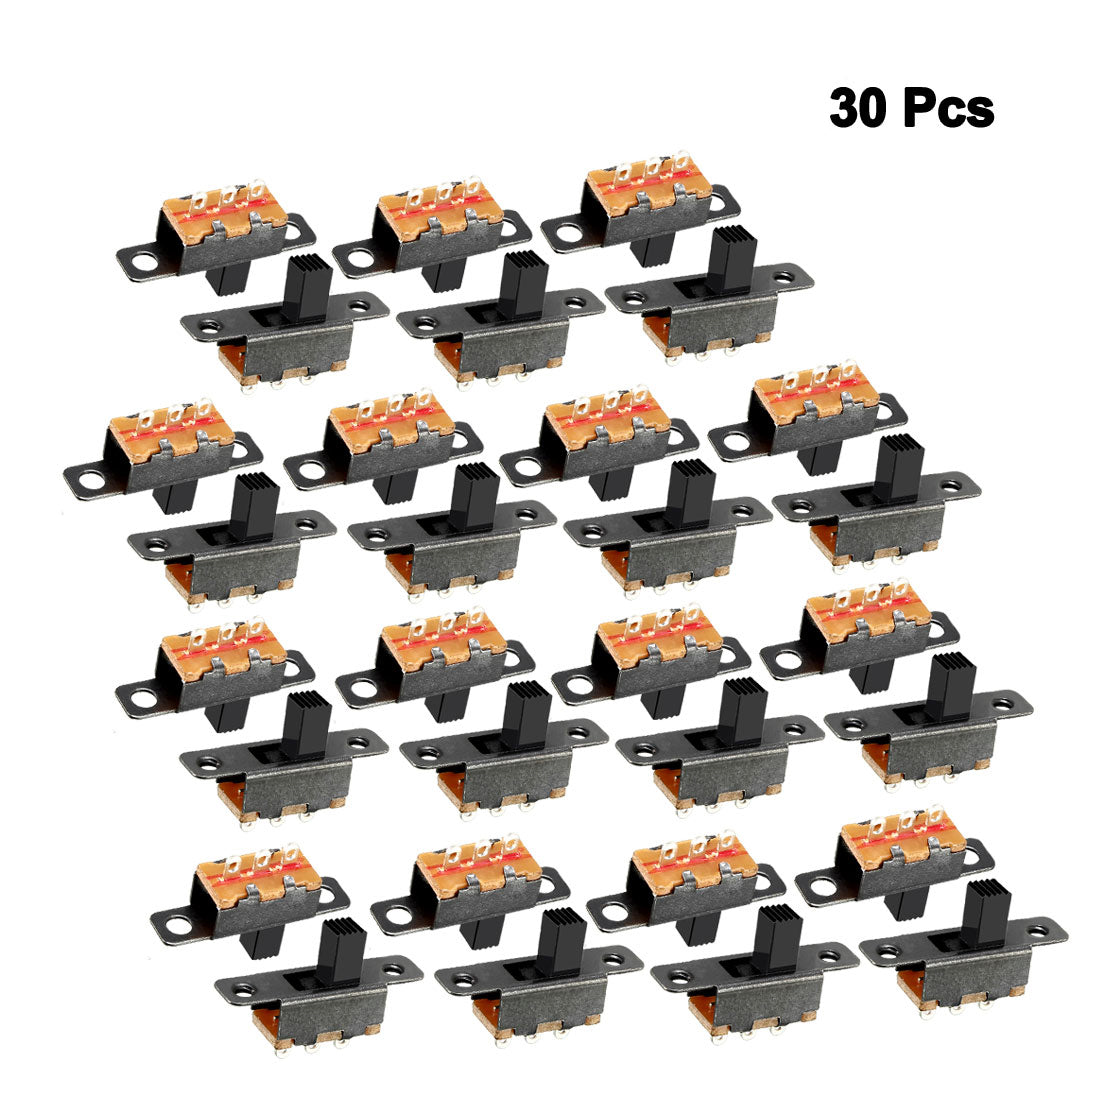 uxcell Uxcell 30Pcs 5mm Vertical Slide Switch SPDT 3 Terminals PCB Panel Latching